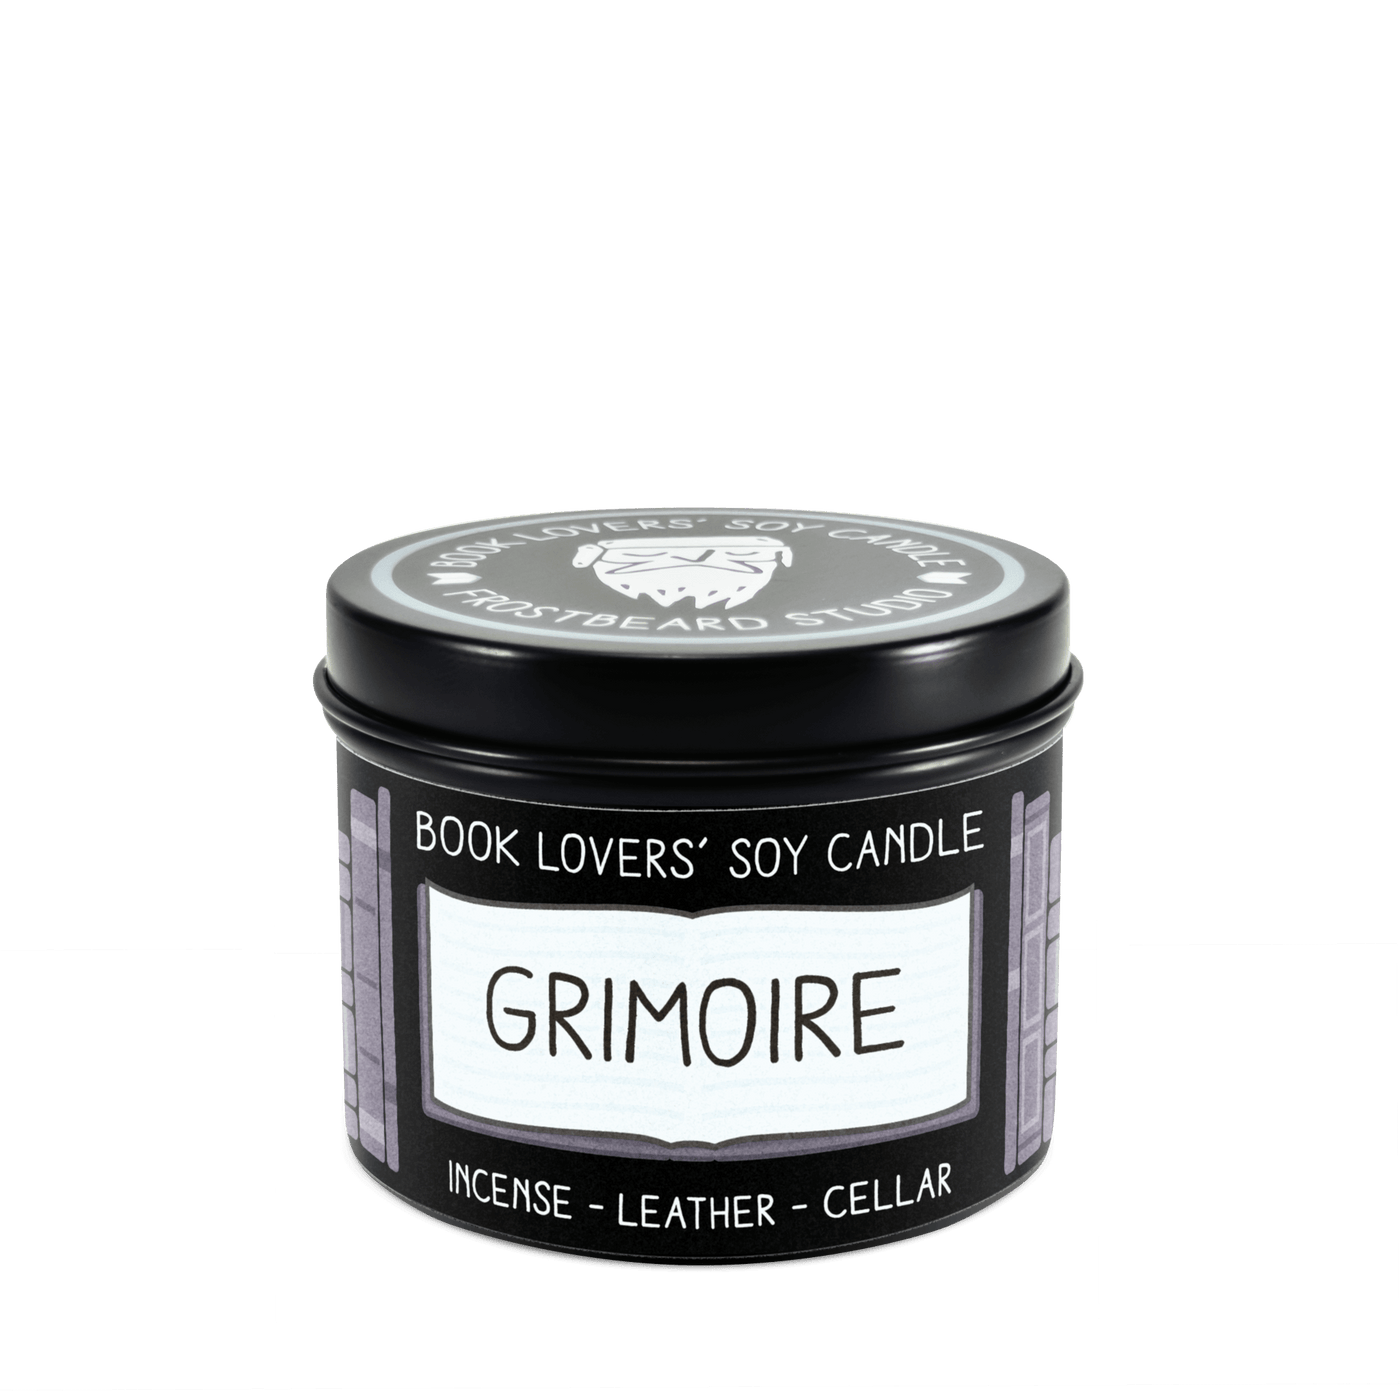 Grimoire - 4 oz Tin - Book Lovers' Soy Candle - Frostbeard Studio